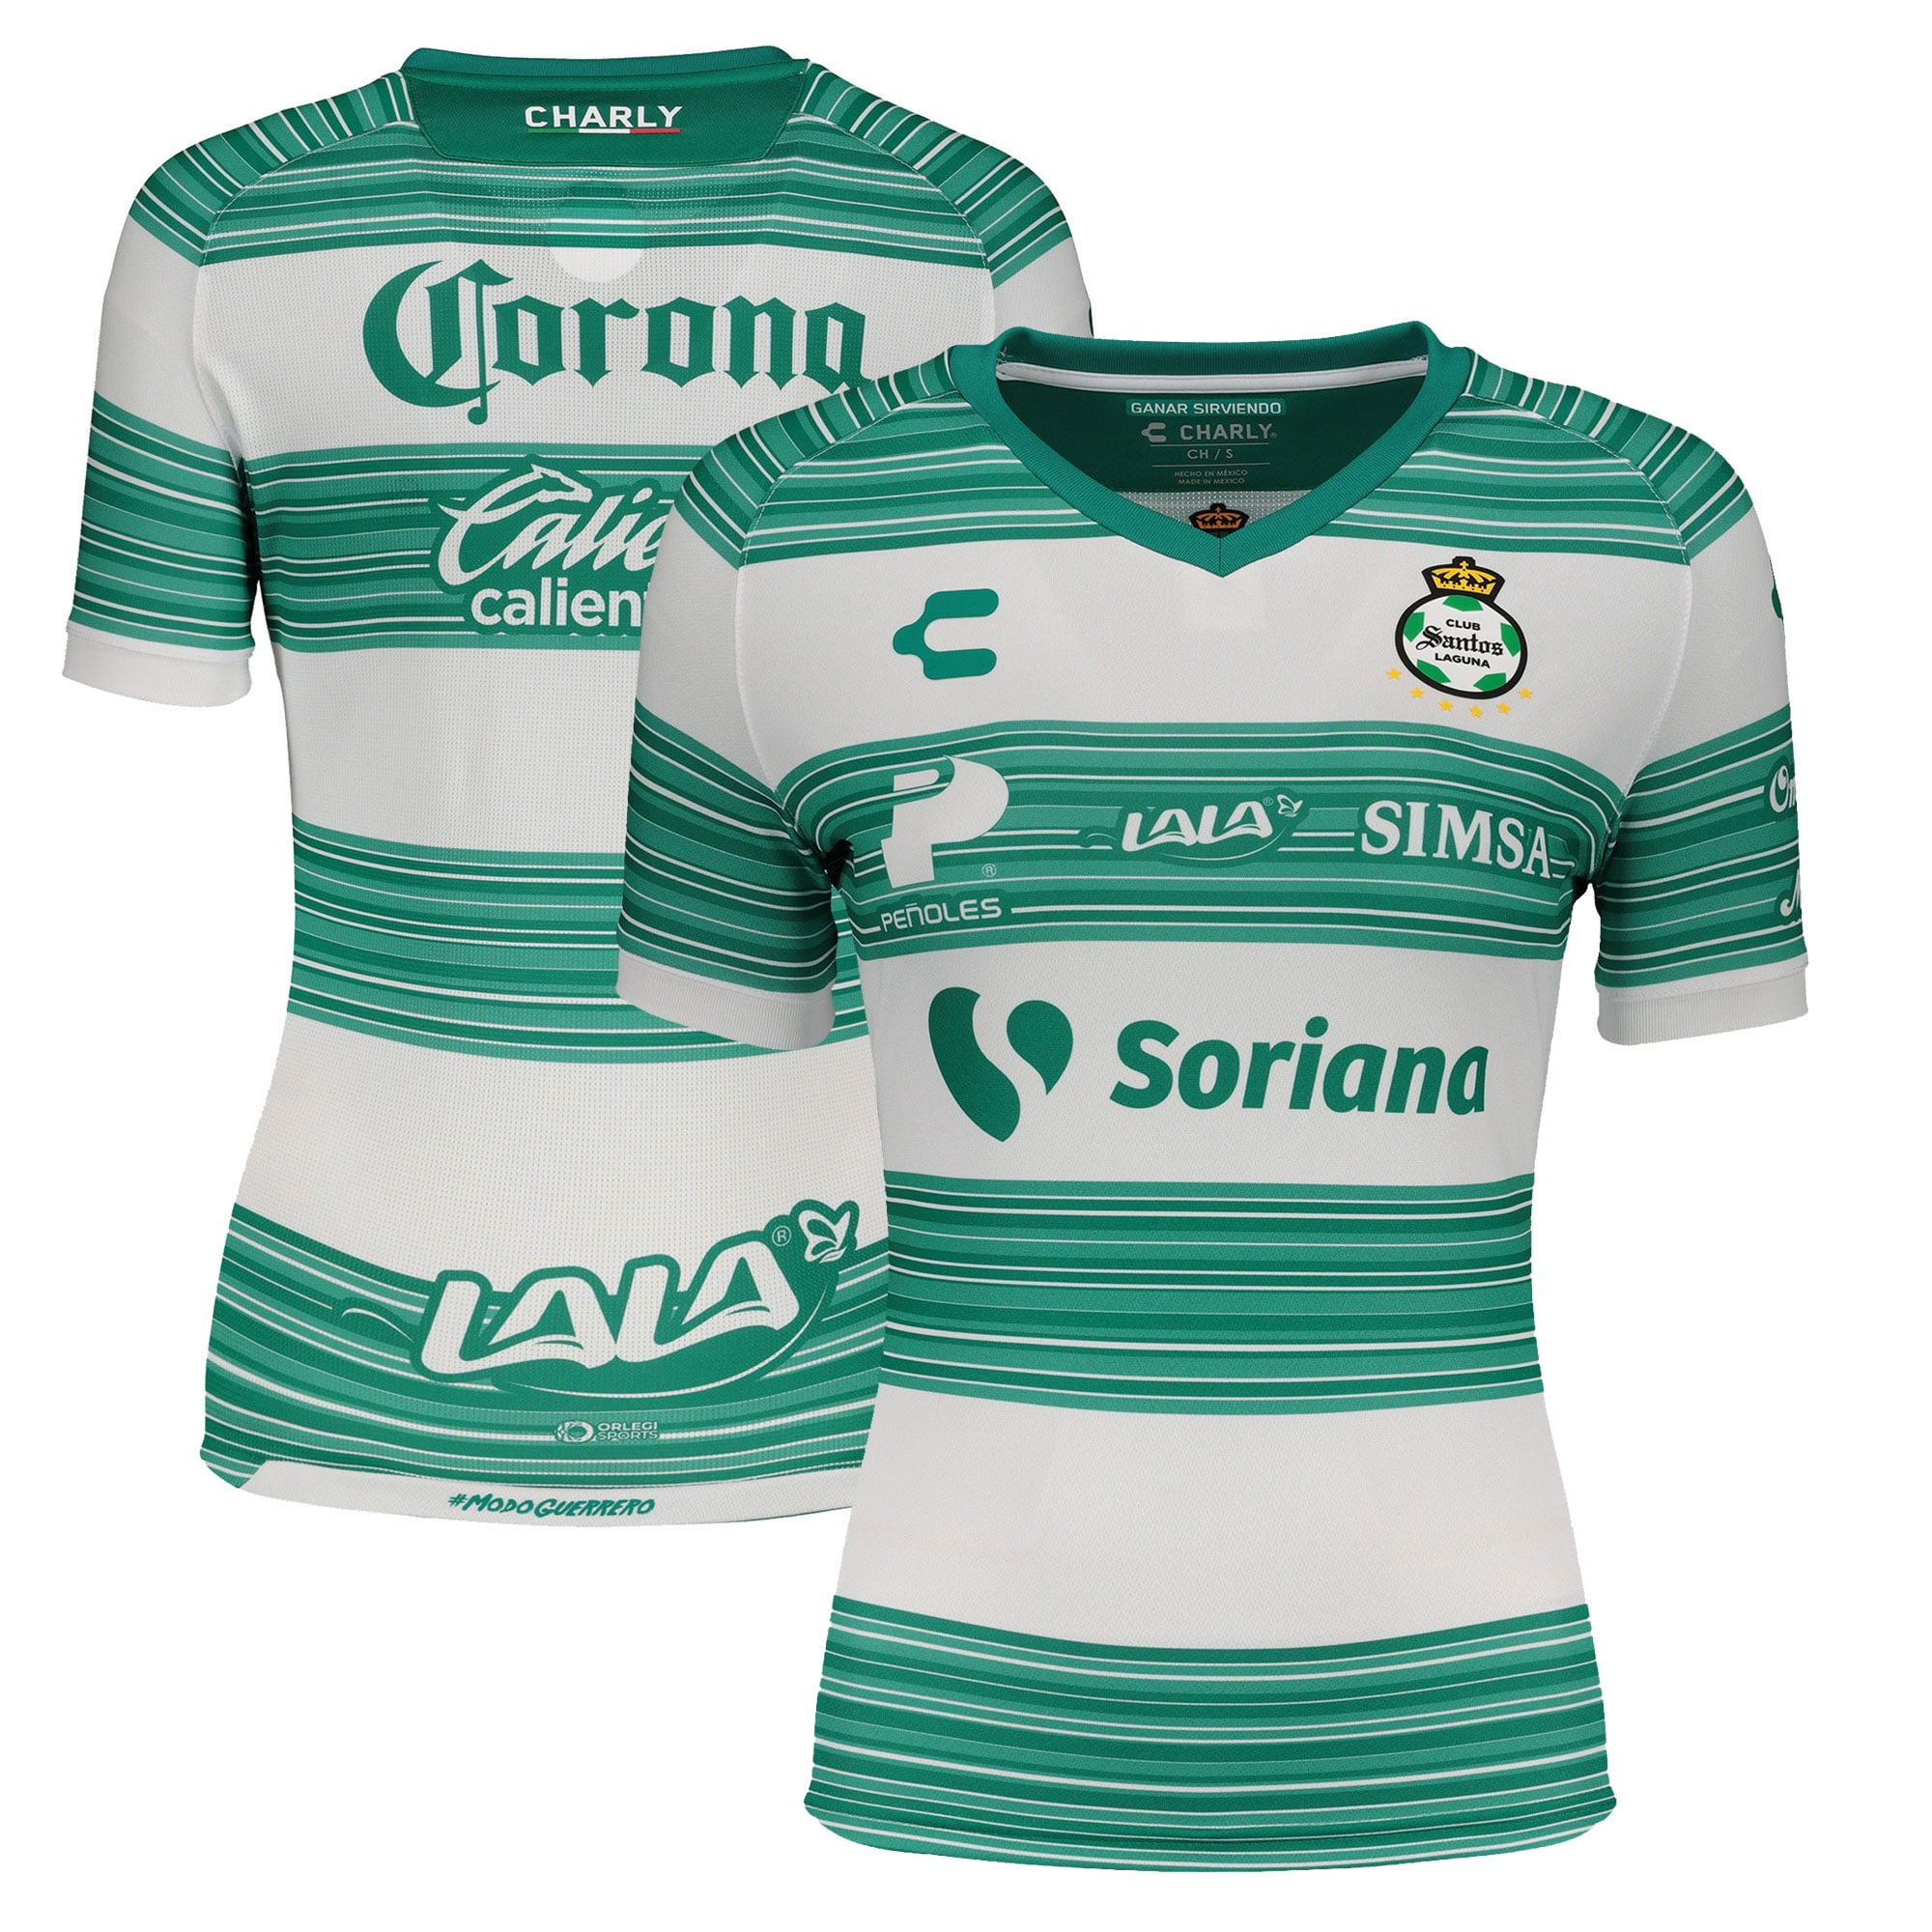 mexico jersey 2020 women's